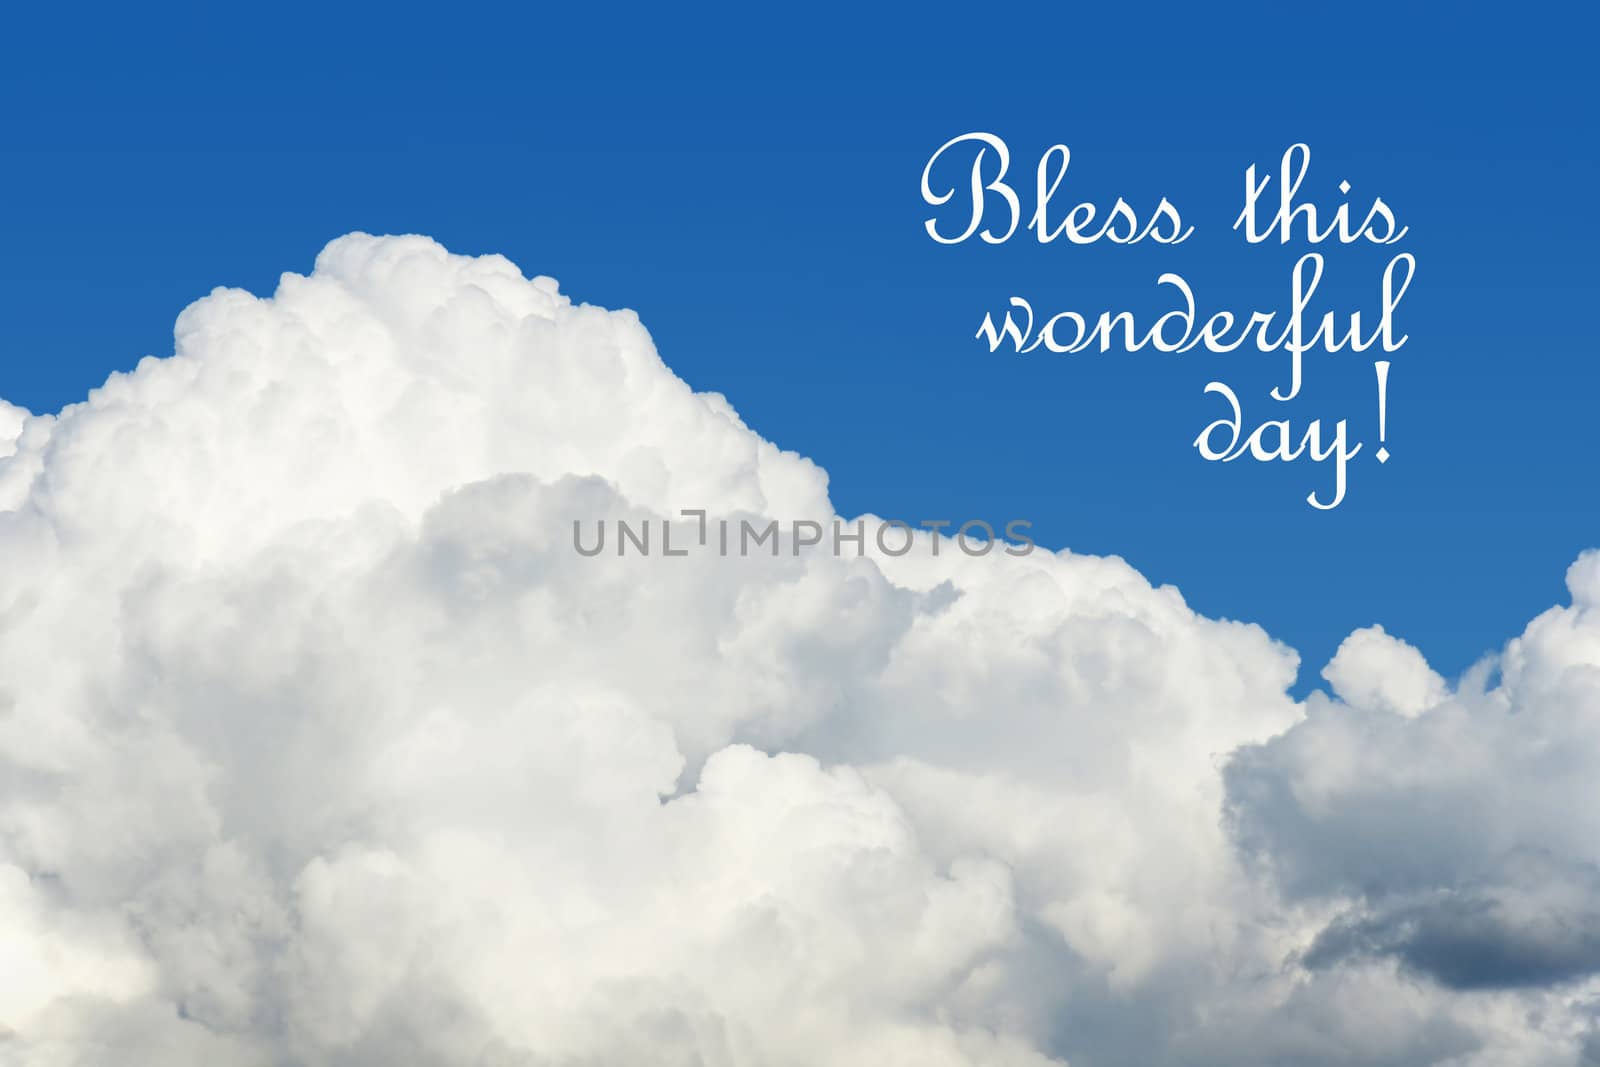 Non denominational prayer written in the bright blue sky with beautiful white puffy cumulus clouds, superb hope, faith, spiritual background or card.